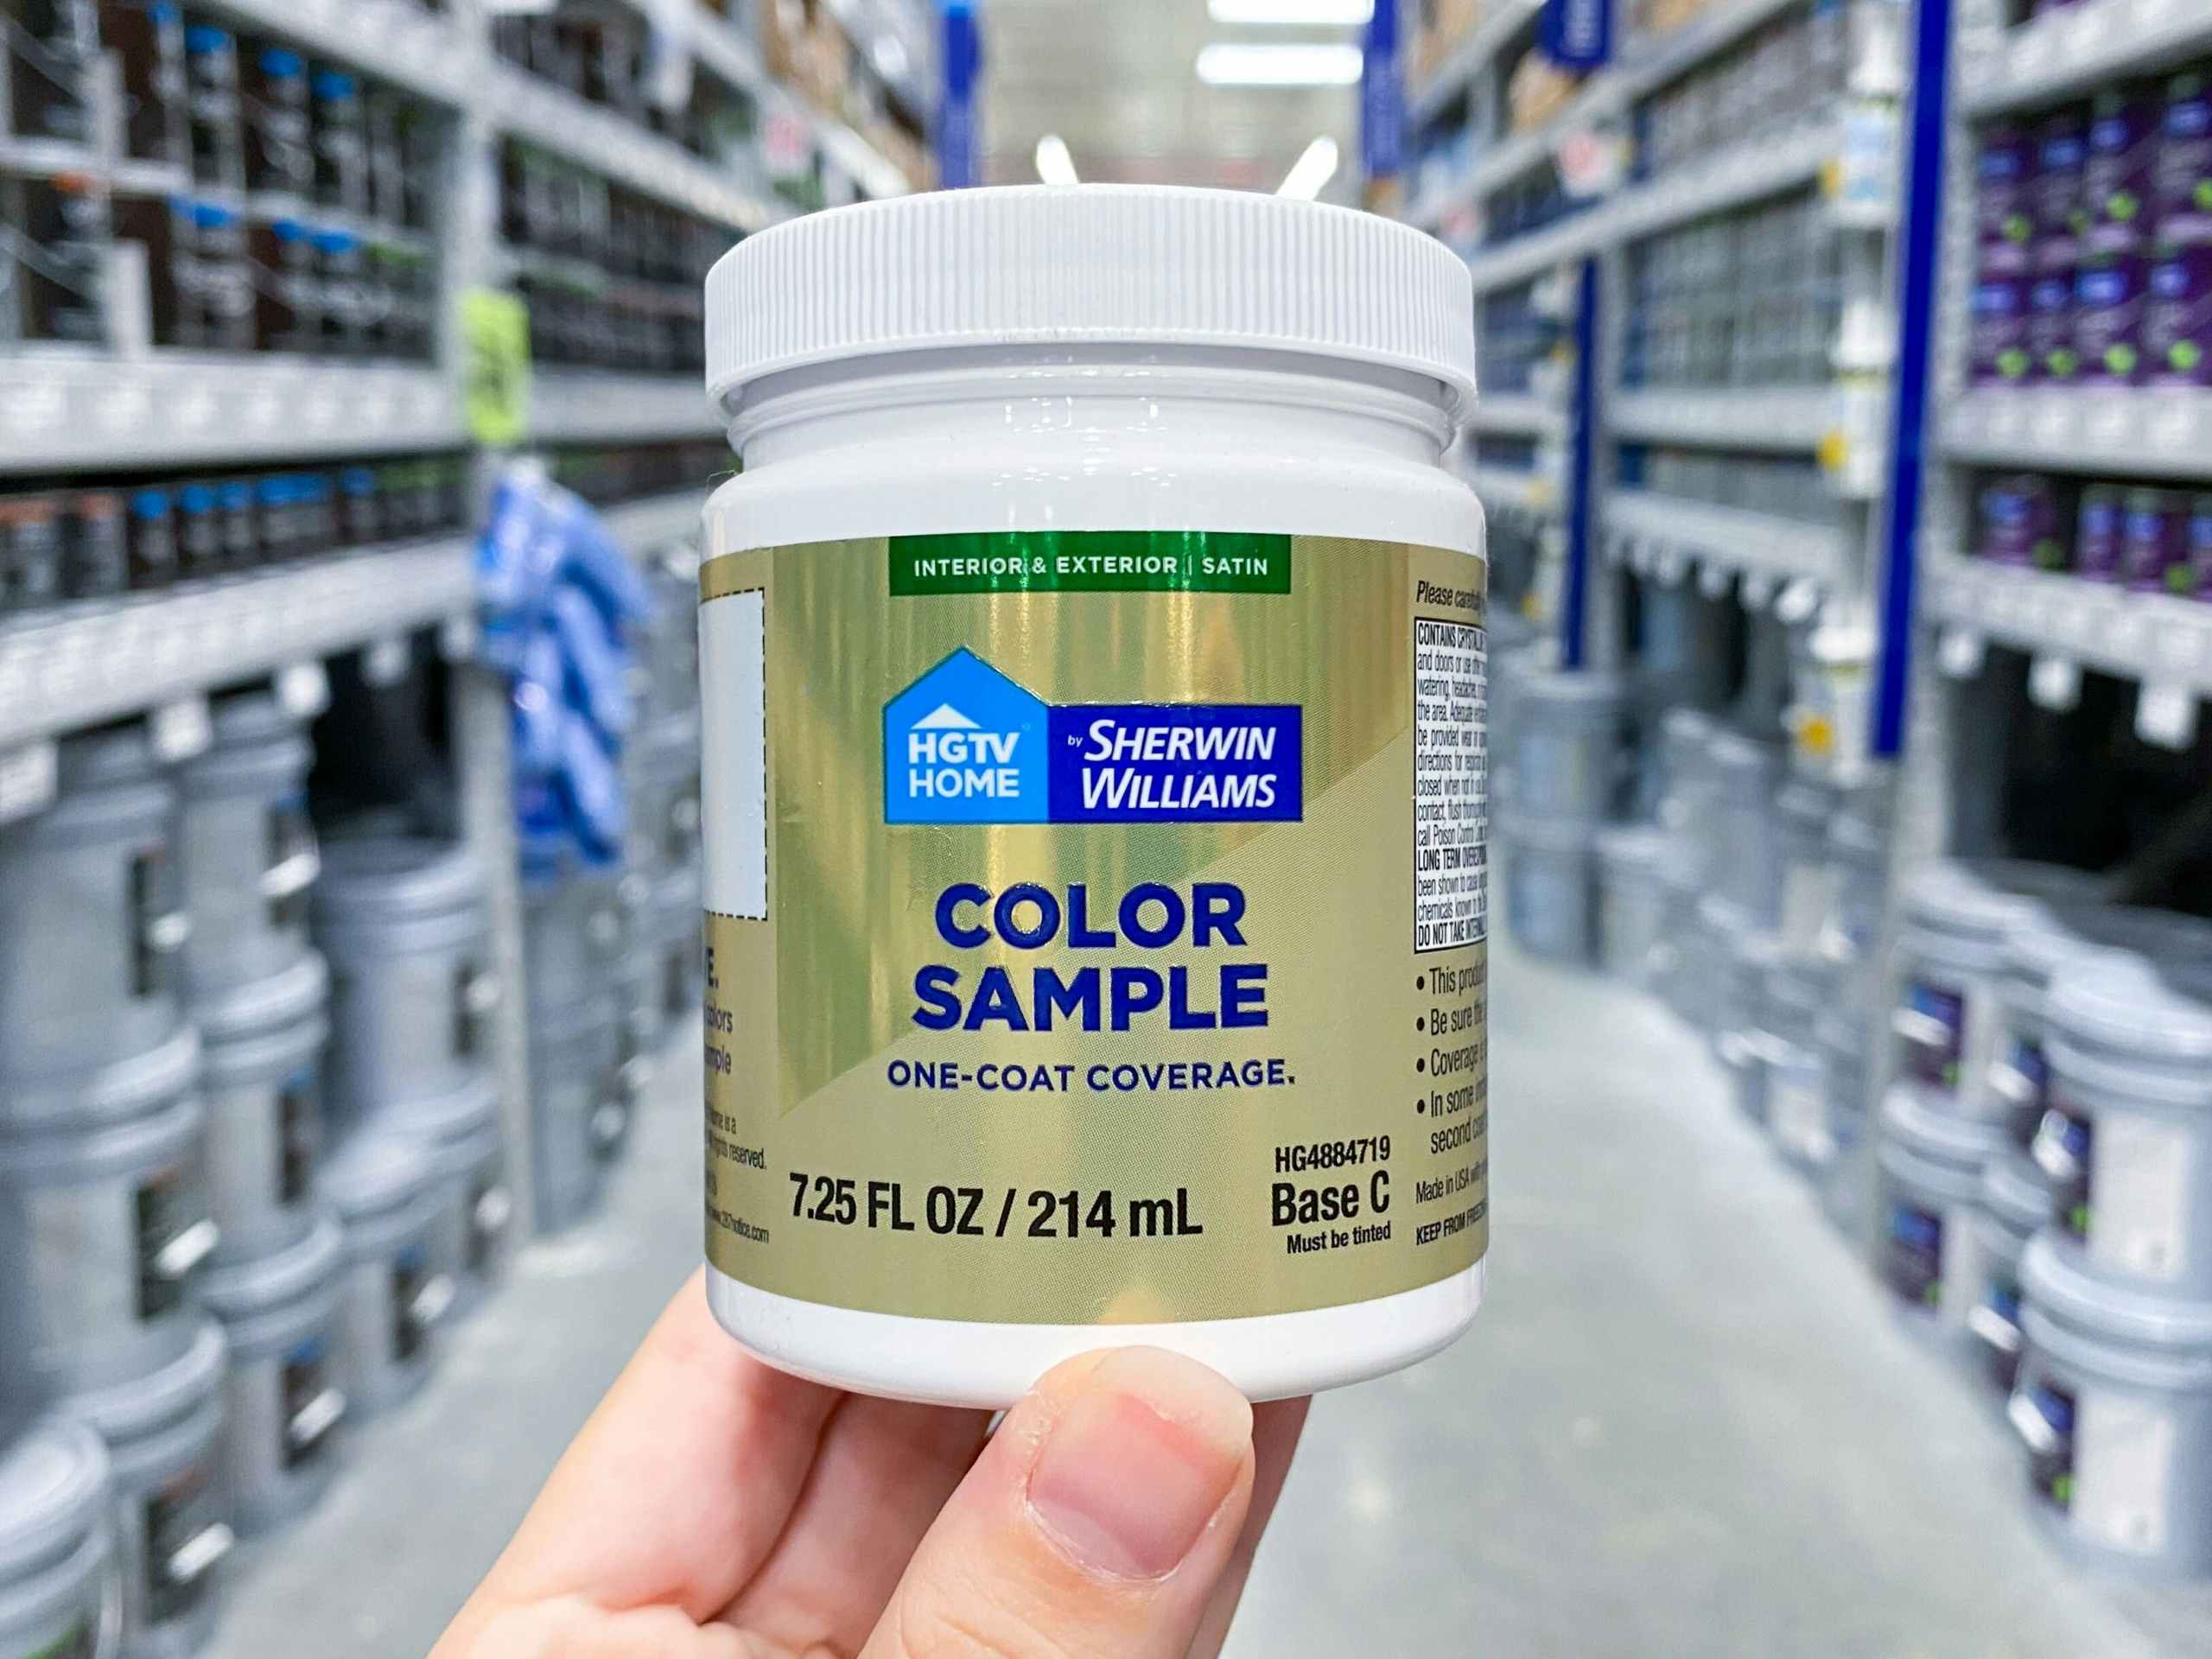 holding up paint sample at Lowes